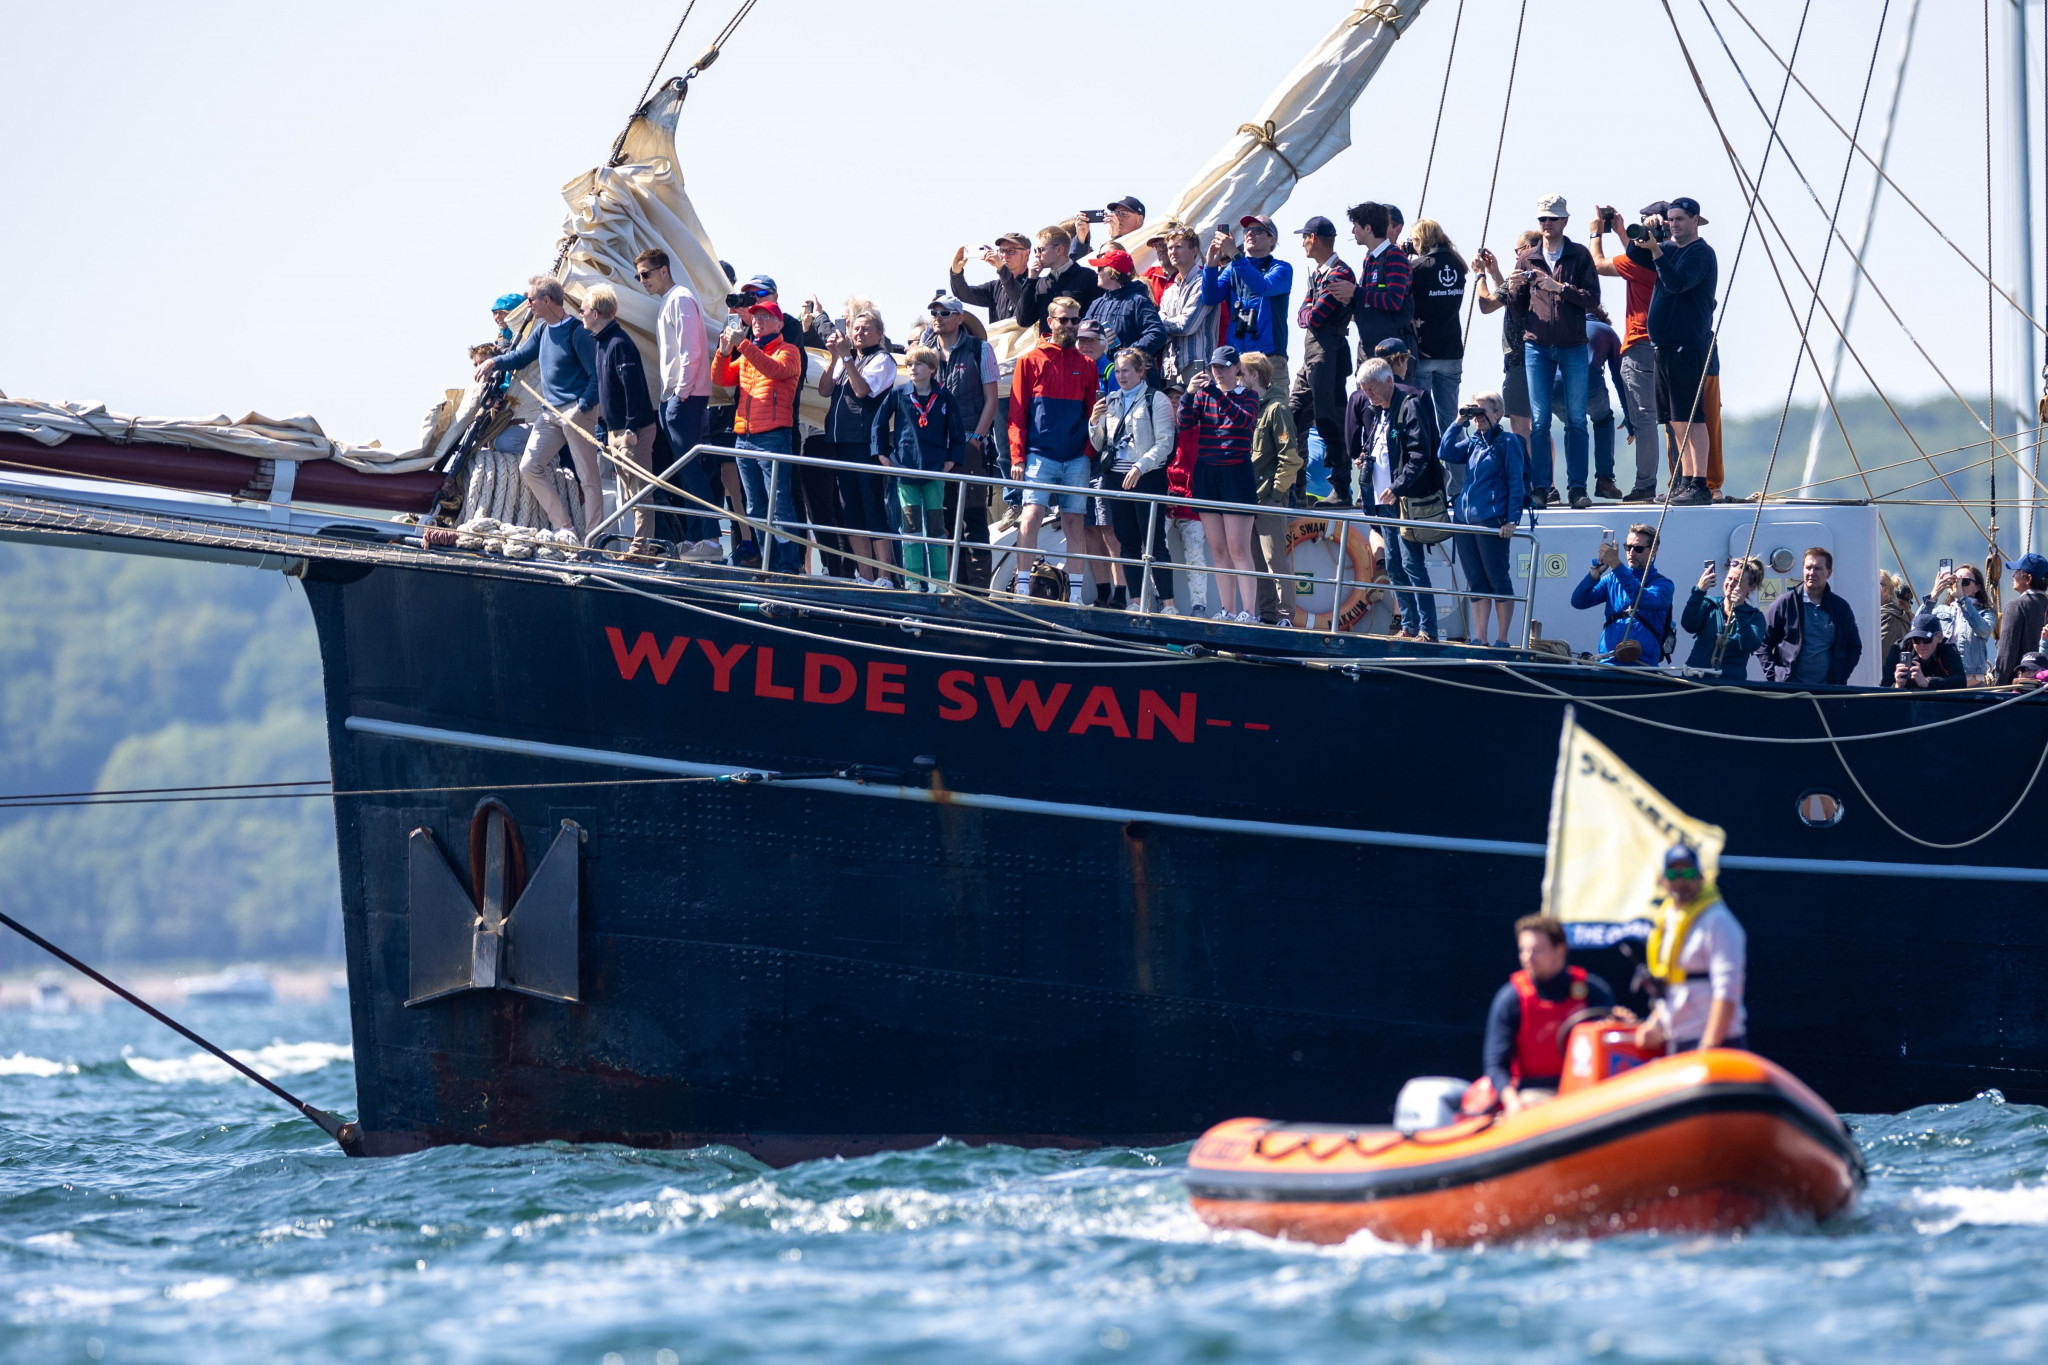 More than 1,000 spectators were spread across around 300 boats on the water ©Peter Broegger